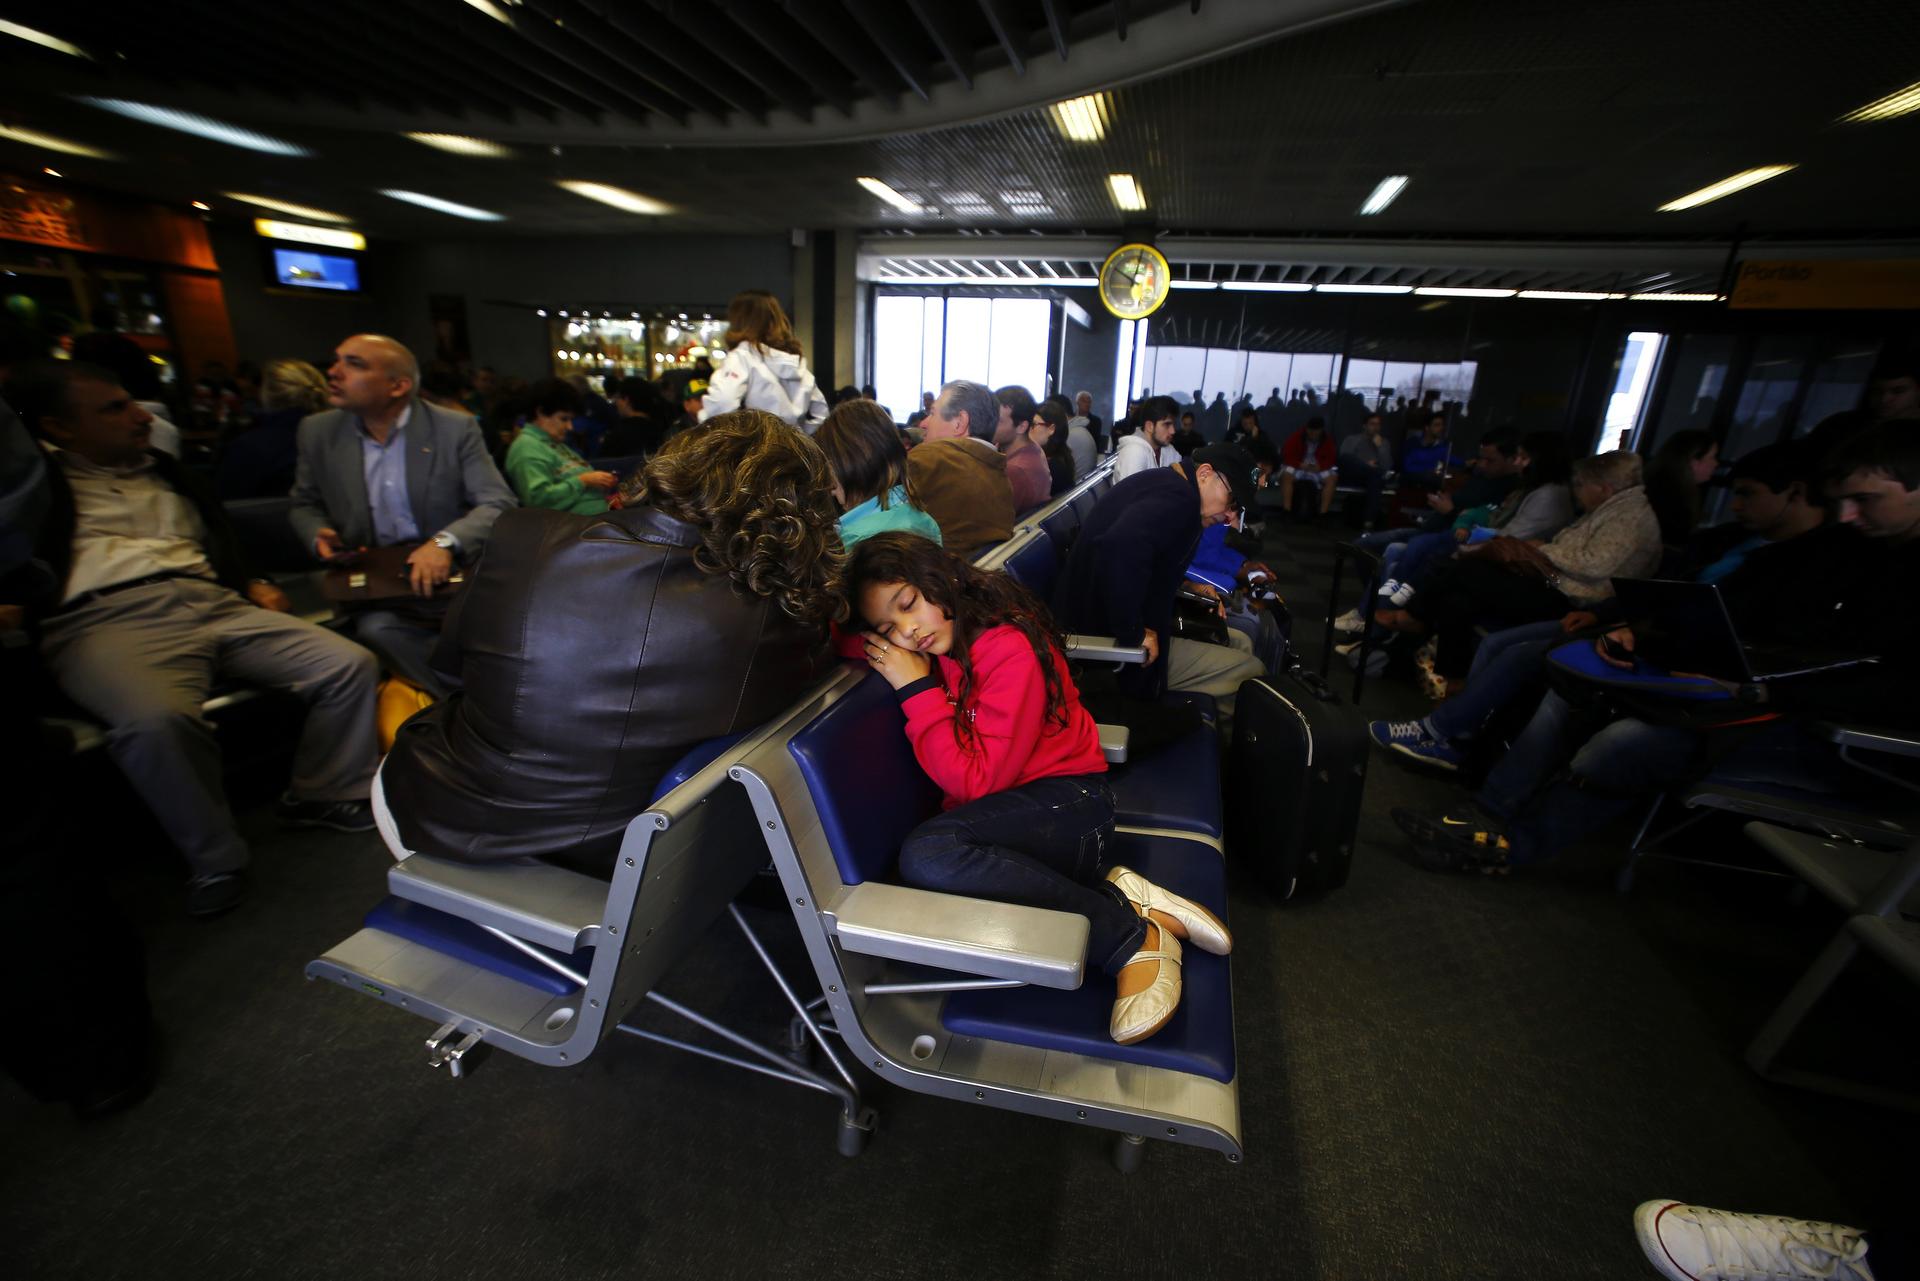 Passengers wait for their delayed flights at Alfonso Pena airport in Curitiba city.